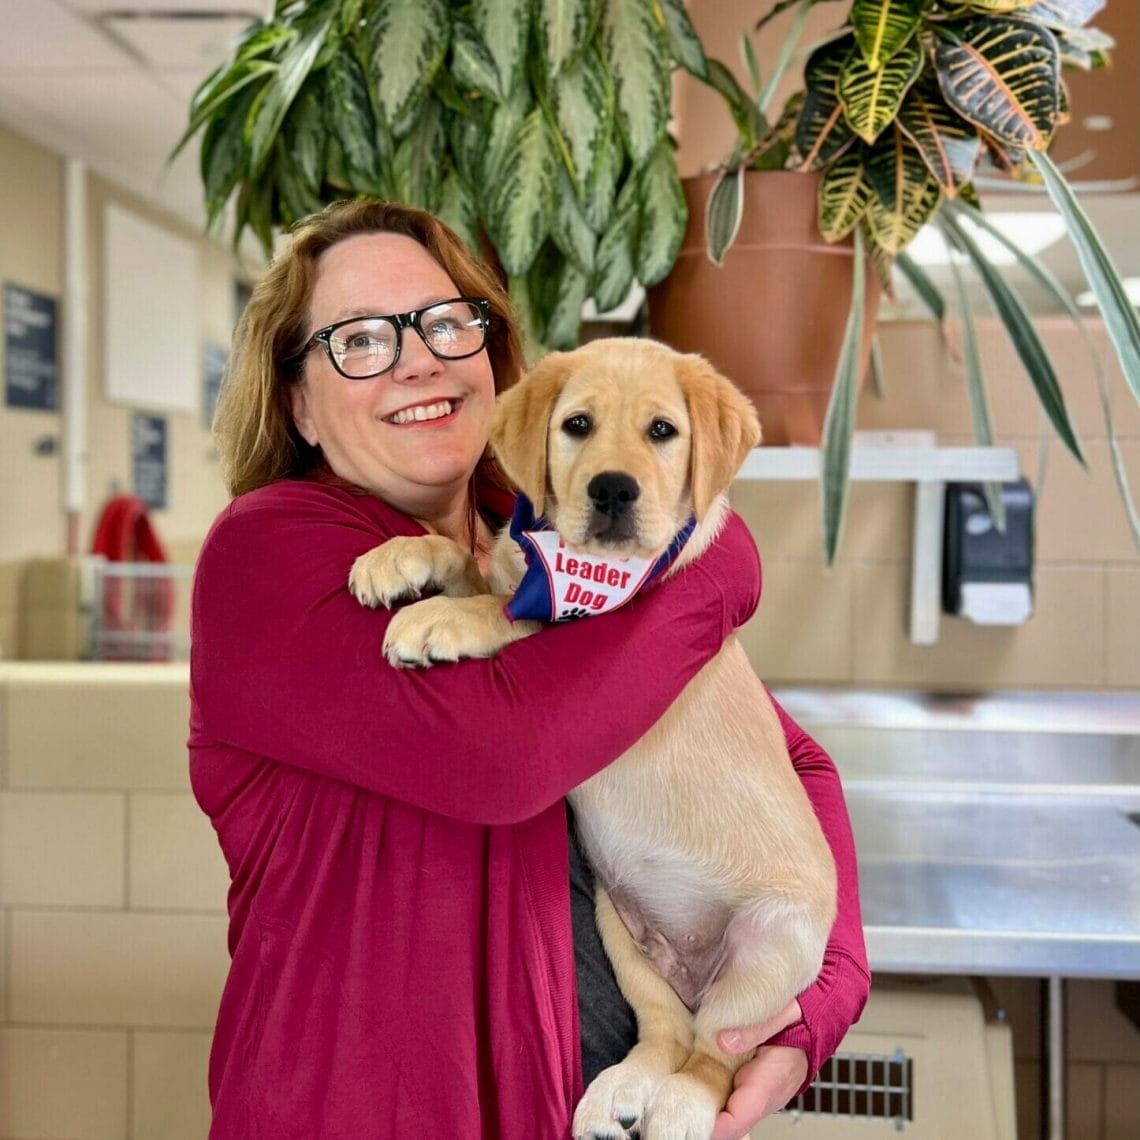 A woman in a maroon sweater smiles while holding a large yellow puppy wearing a future leader dog bandana